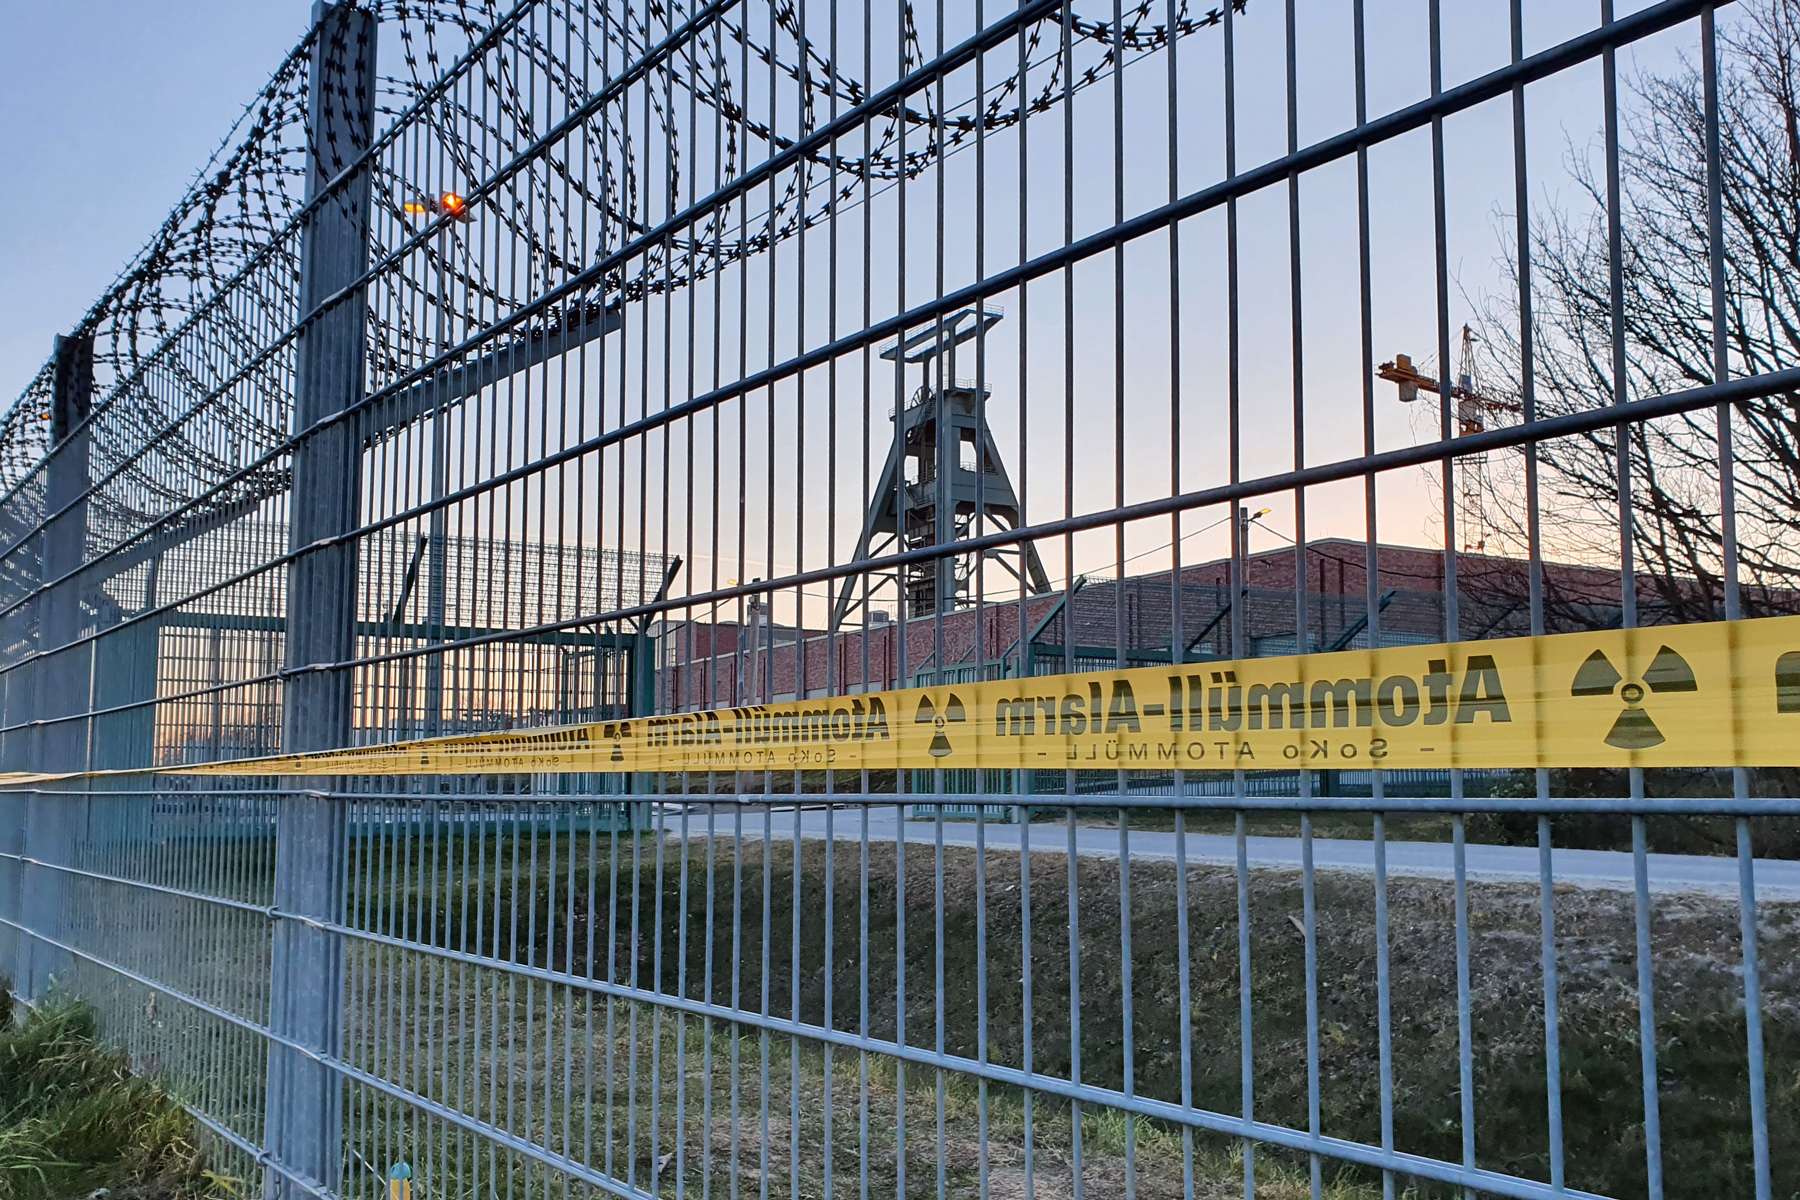 A heavy iron fence in front of the Konrad repository with symbols of resistance against the facility